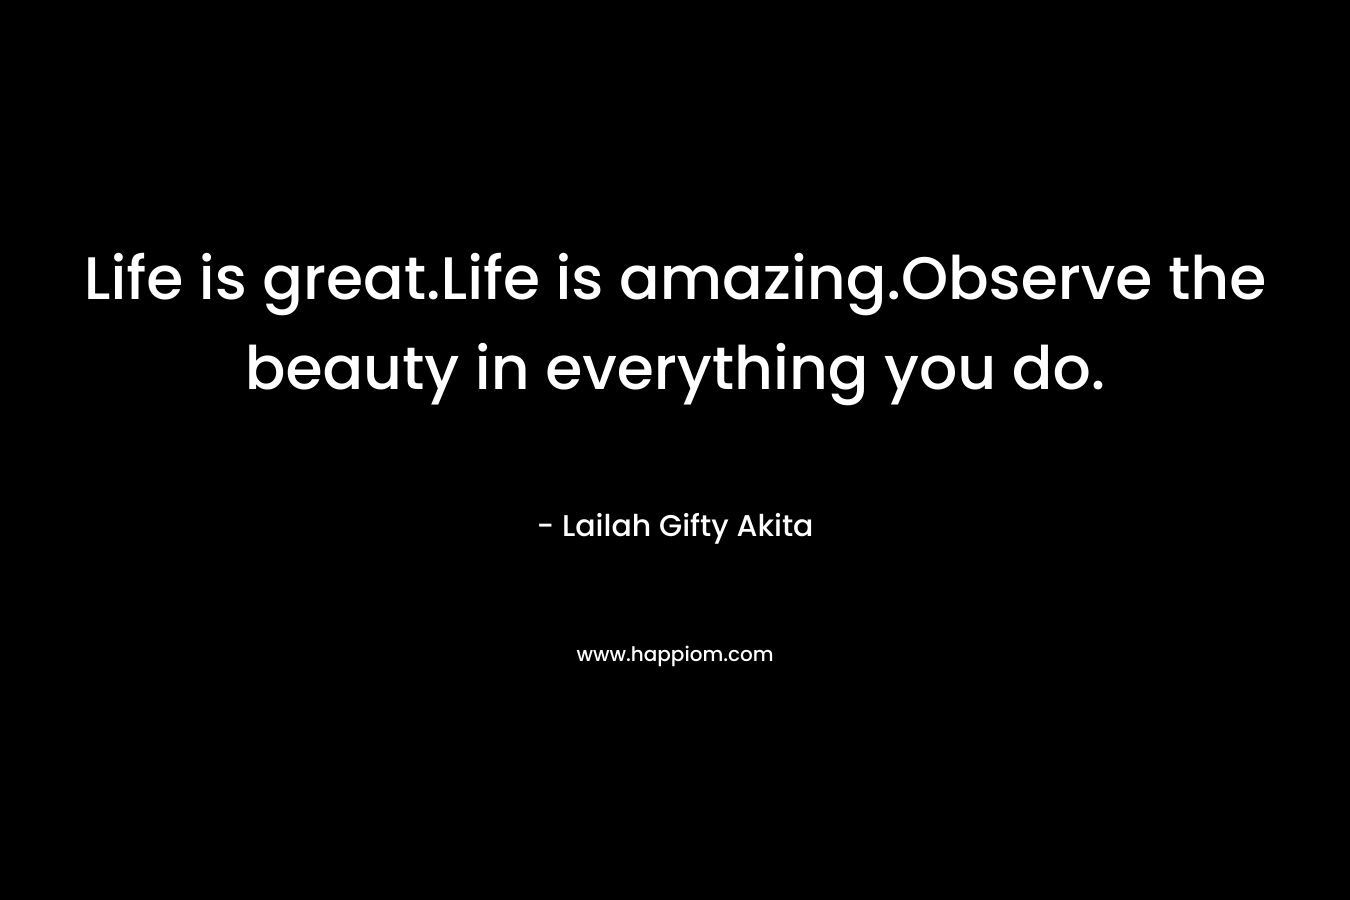 Life is great.Life is amazing.Observe the beauty in everything you do.